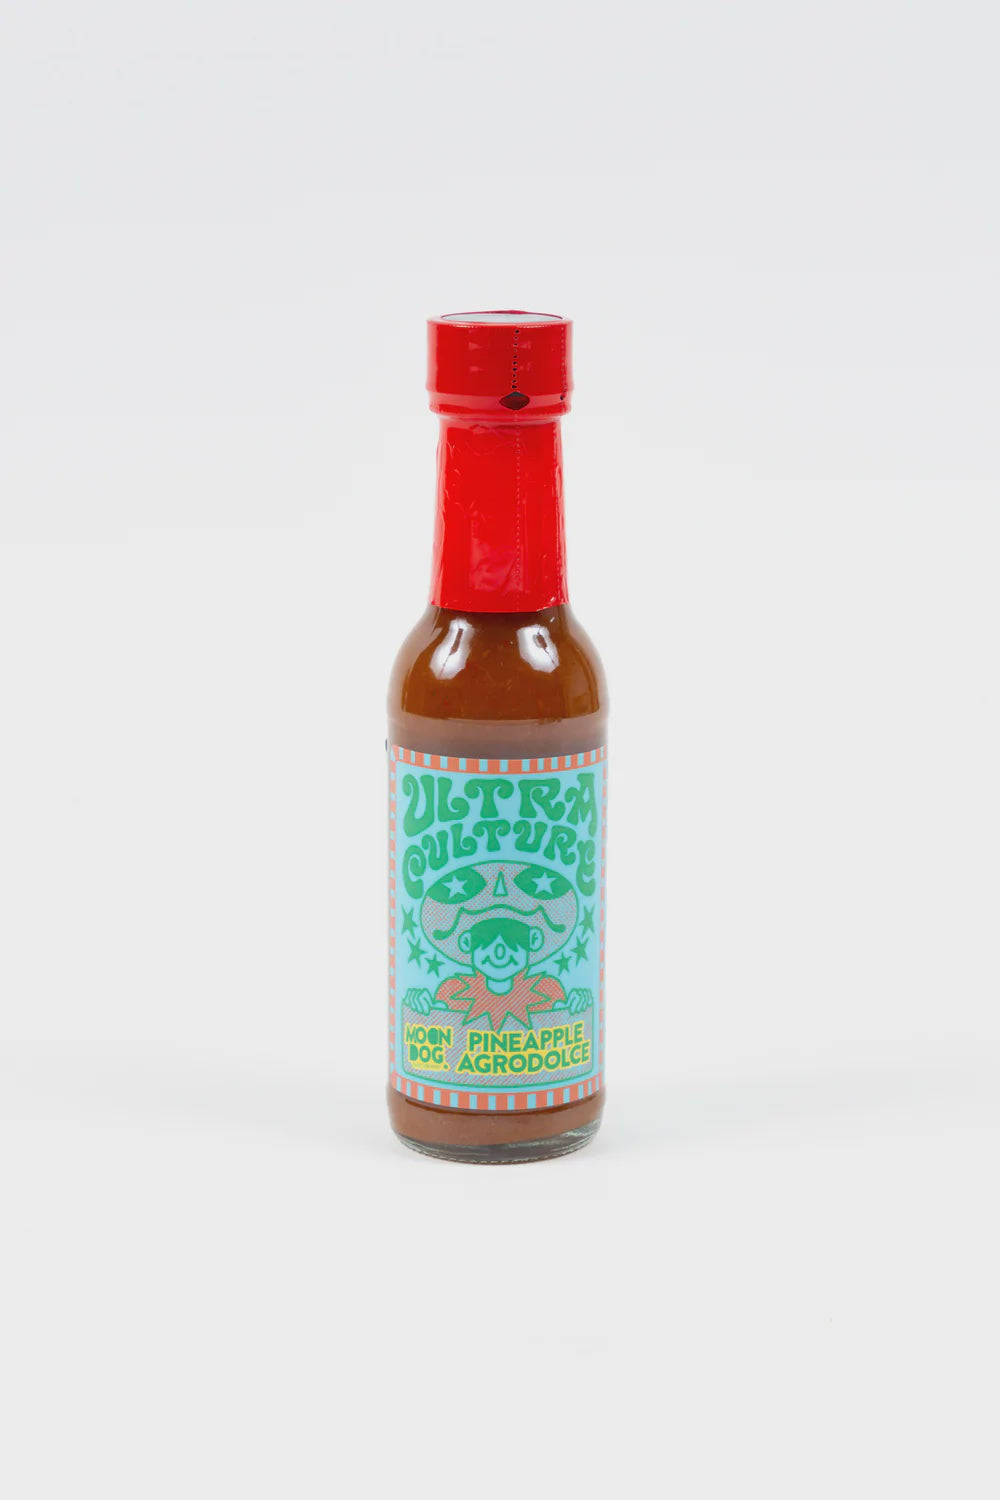 Pineapple AgroDolce Hot Sauce